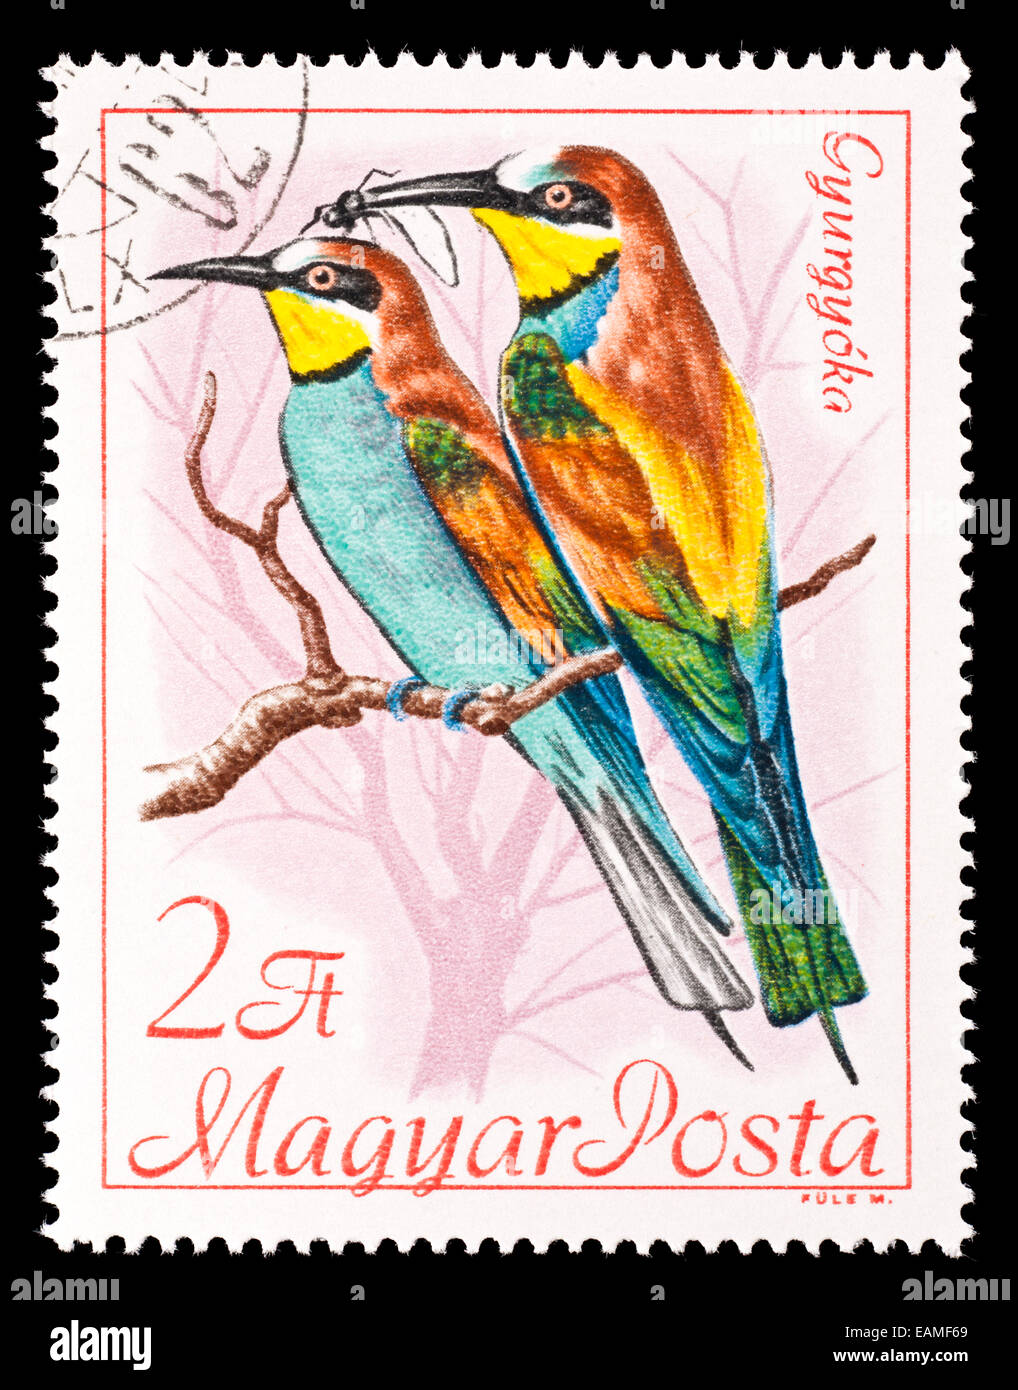 Postage stamp from Hungary depicting European Bee-eaters, issued for the International Bird Preservation Congress in 1968. Stock Photo